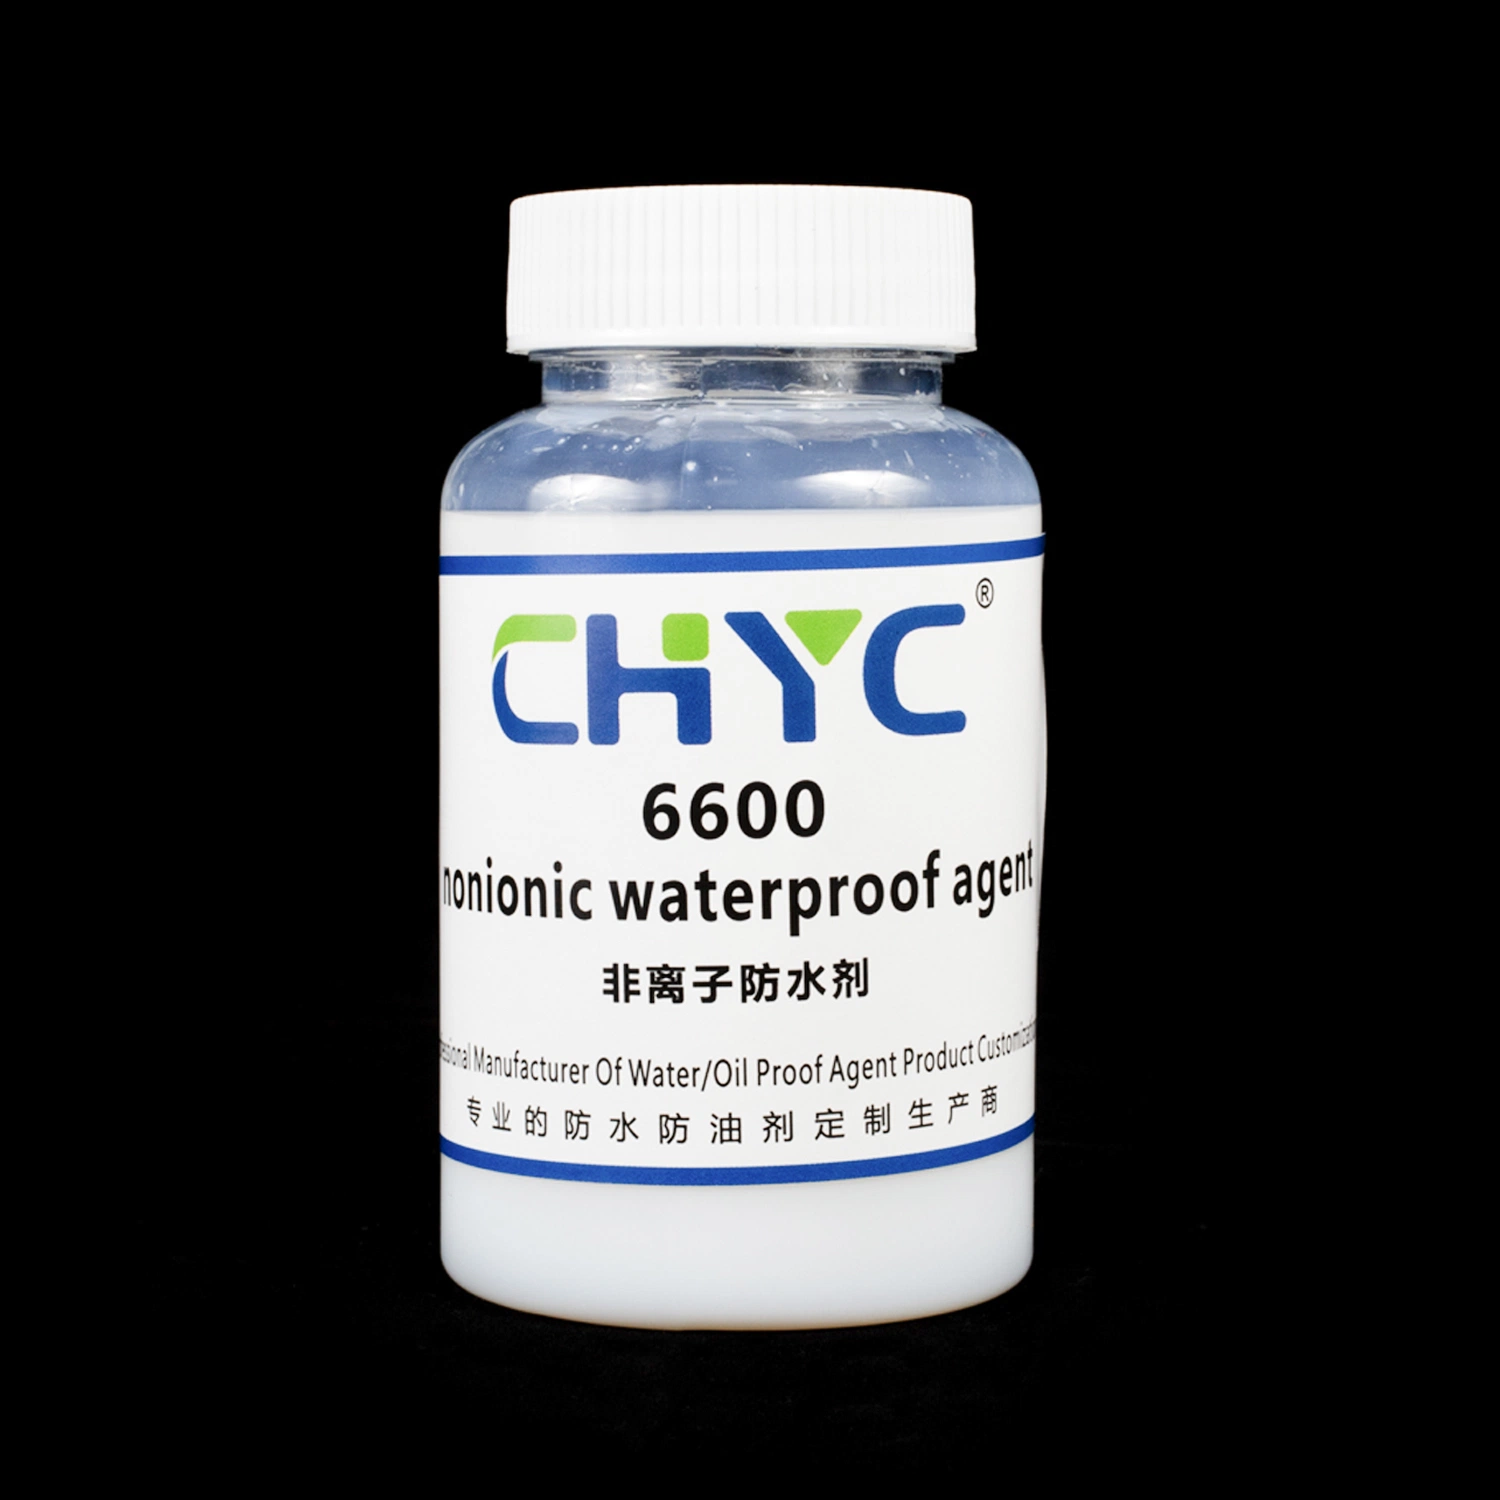 Organic Chemicals-Textile Chemicals-Water/Oil Repellent-Organic Chemicals Nonionic Waterproof Agent Fe-6600 for Textile Fabrics Finishing